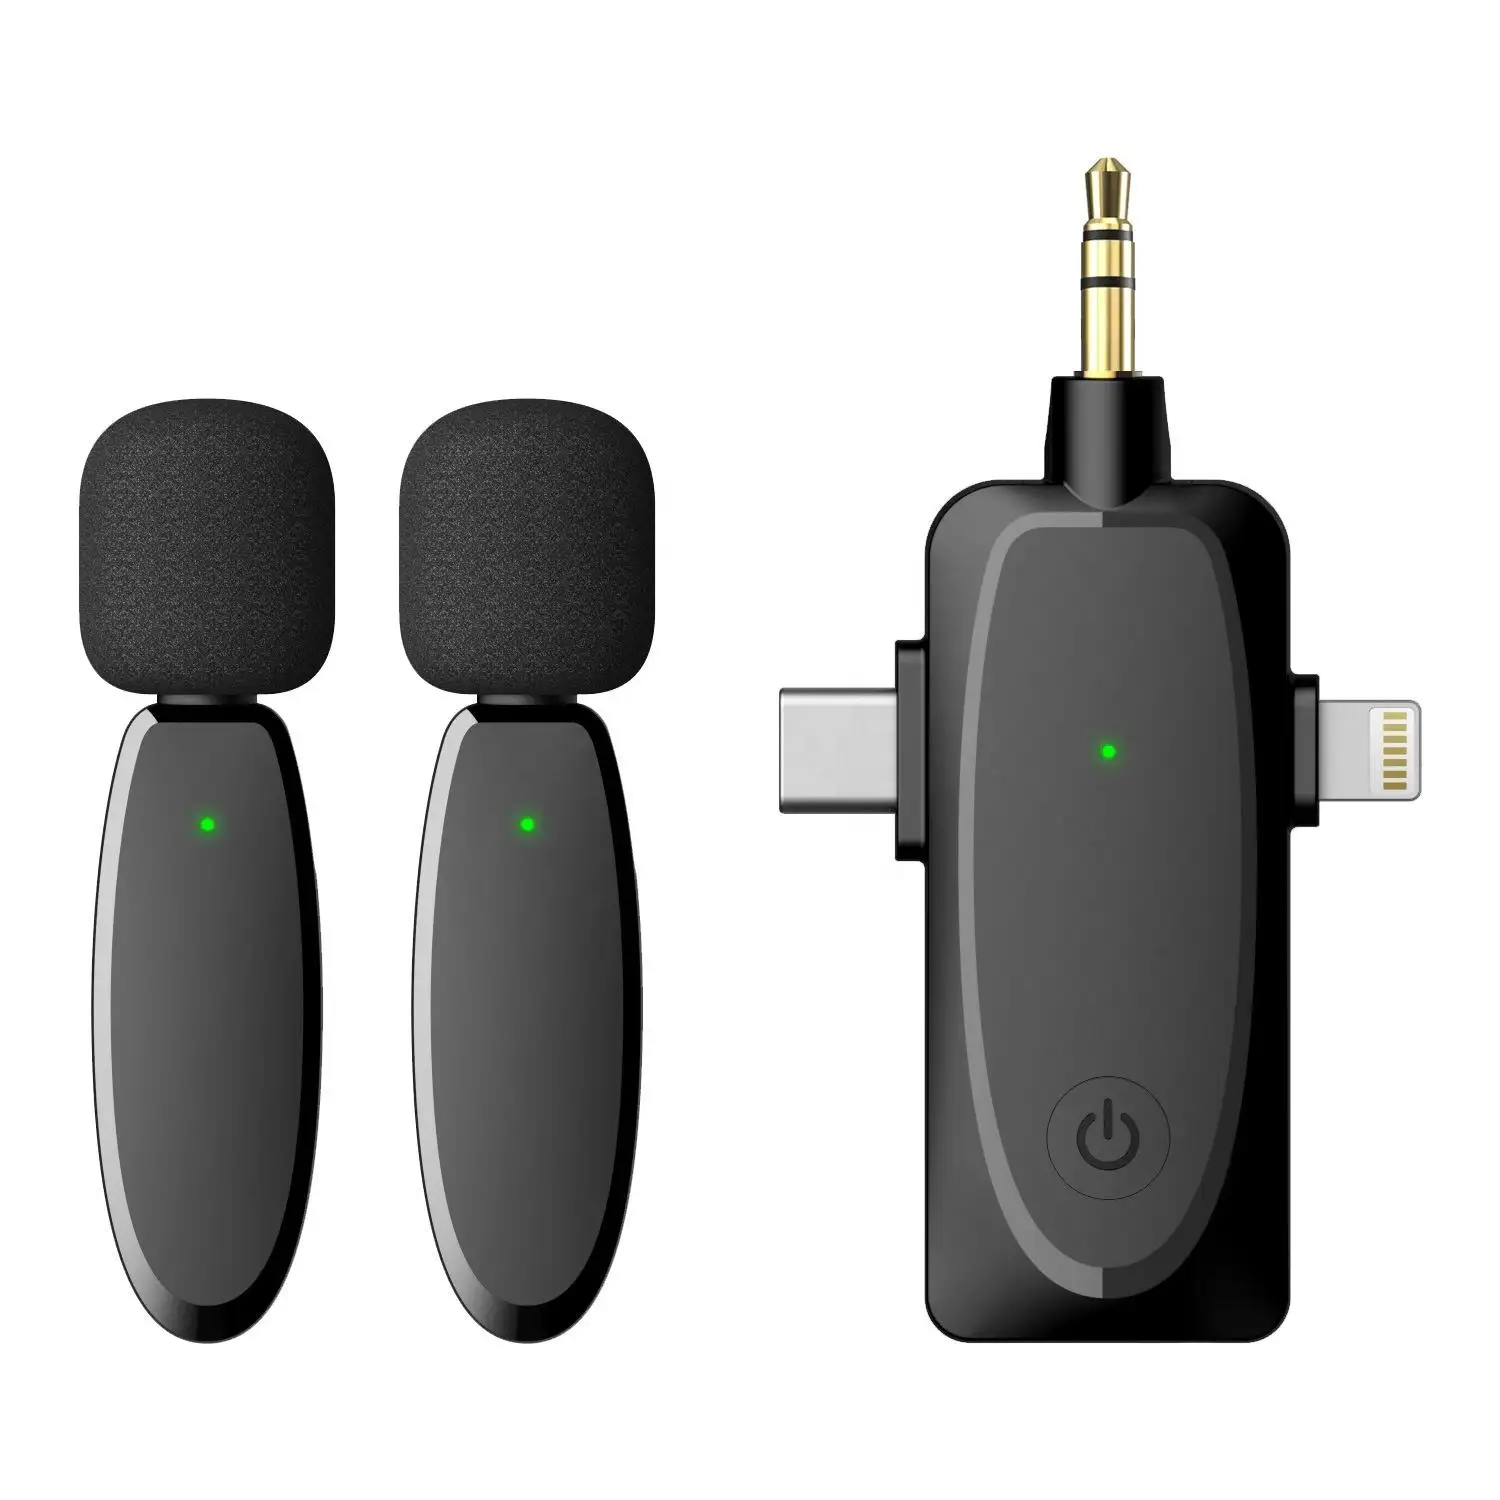 2 in 1 Lavalier Wireless Microphone AP004 Smart Noise Cancelling 120m Wireless Transmission 20H Endurance Mic For smartphones